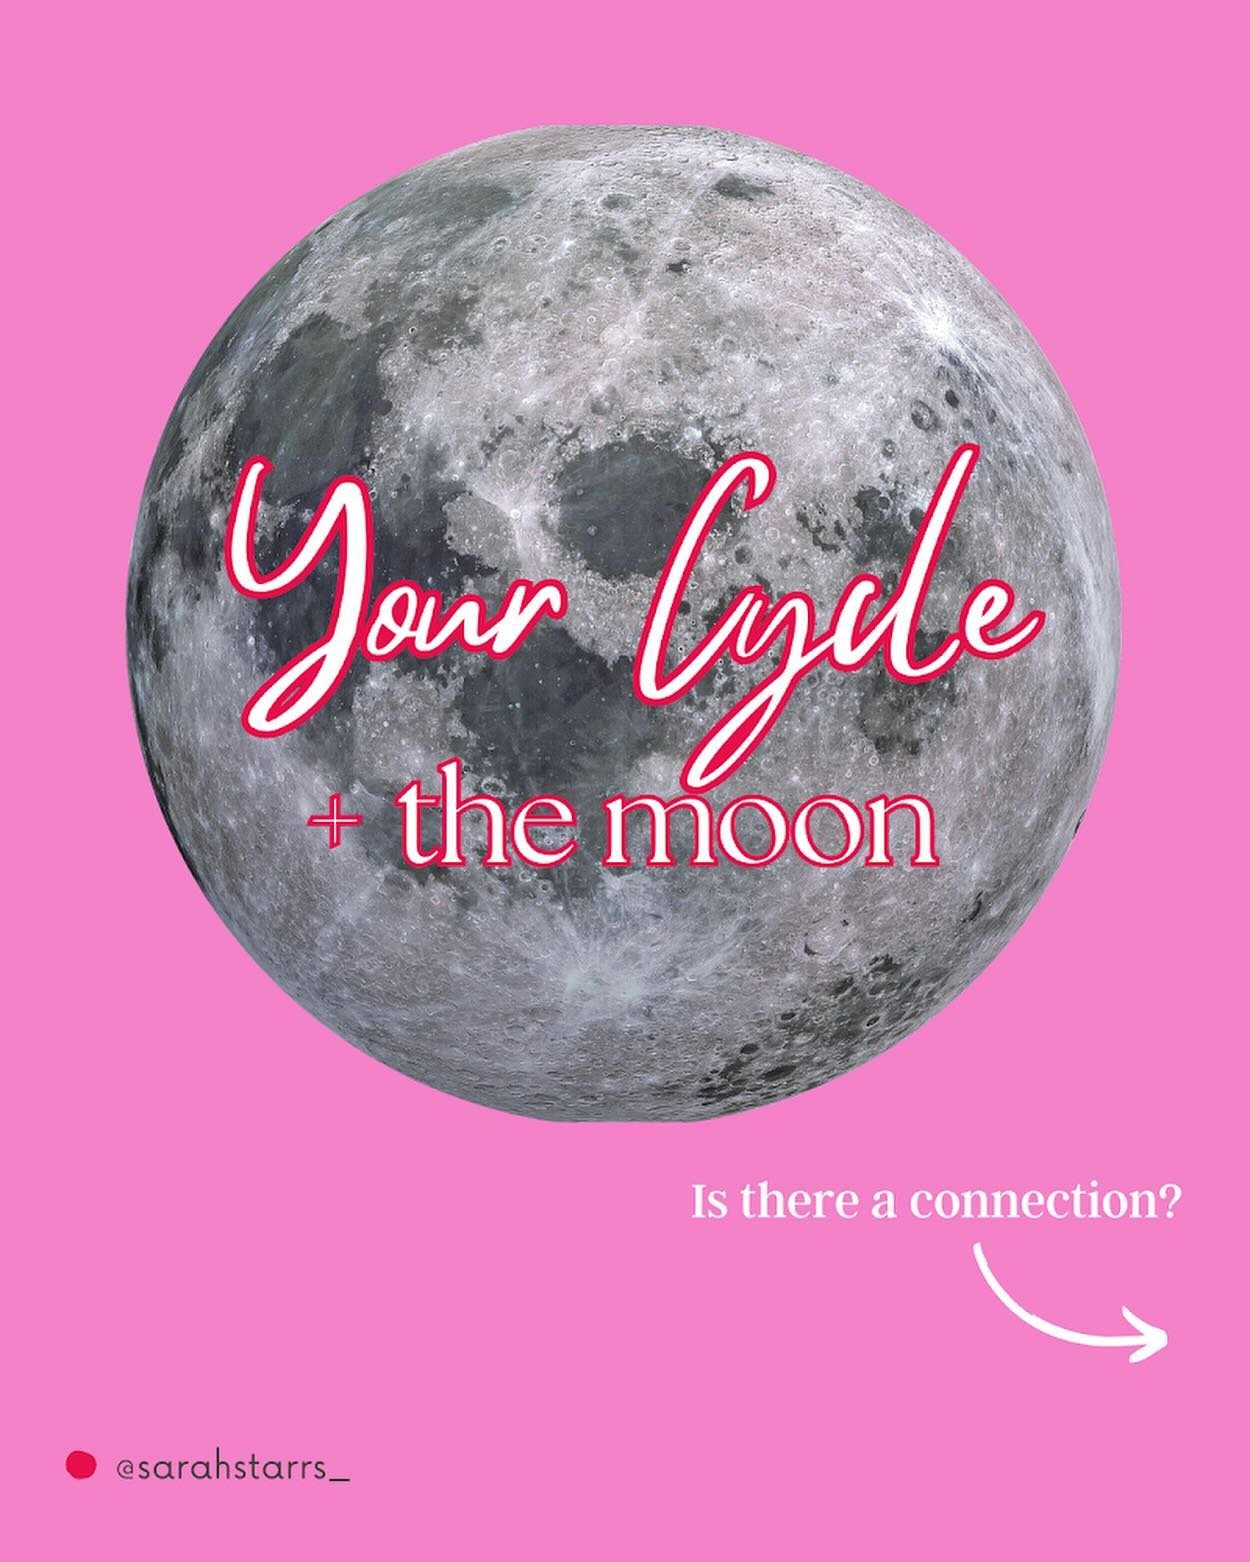 The moon + your cycle...is there a connection? 🌕

Let&rsquo;s dive into this!

And make sure you scroll through to the final slide for a very important fact to keep in mind.